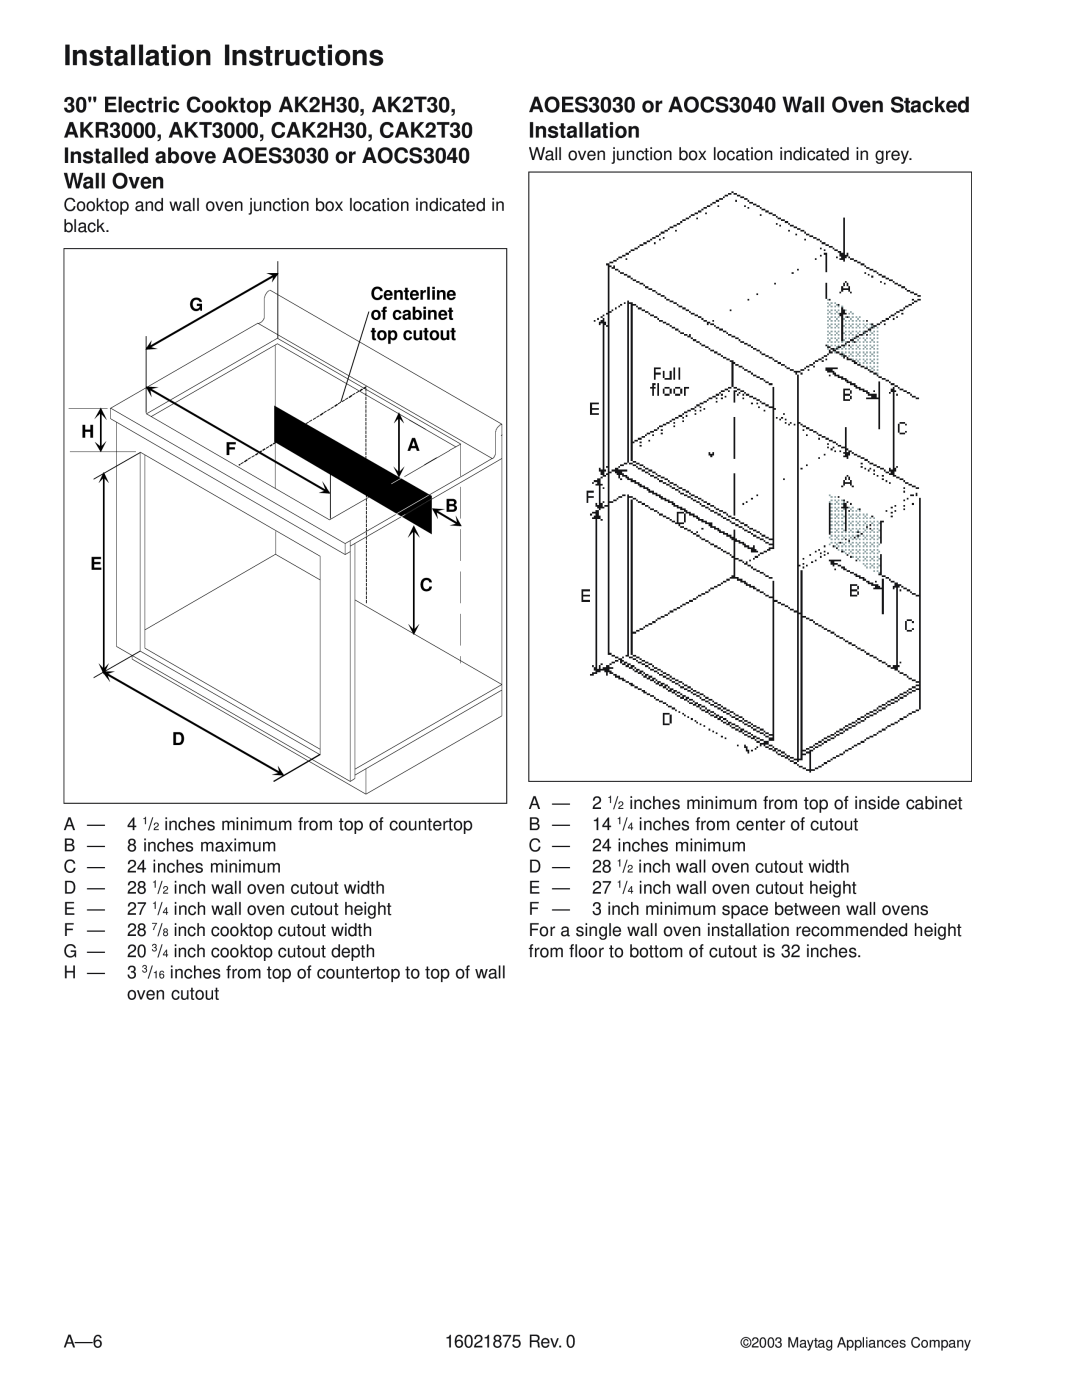 Maytag AOES3030, AOCS3040 manual Installation Instructions, of cabinet 